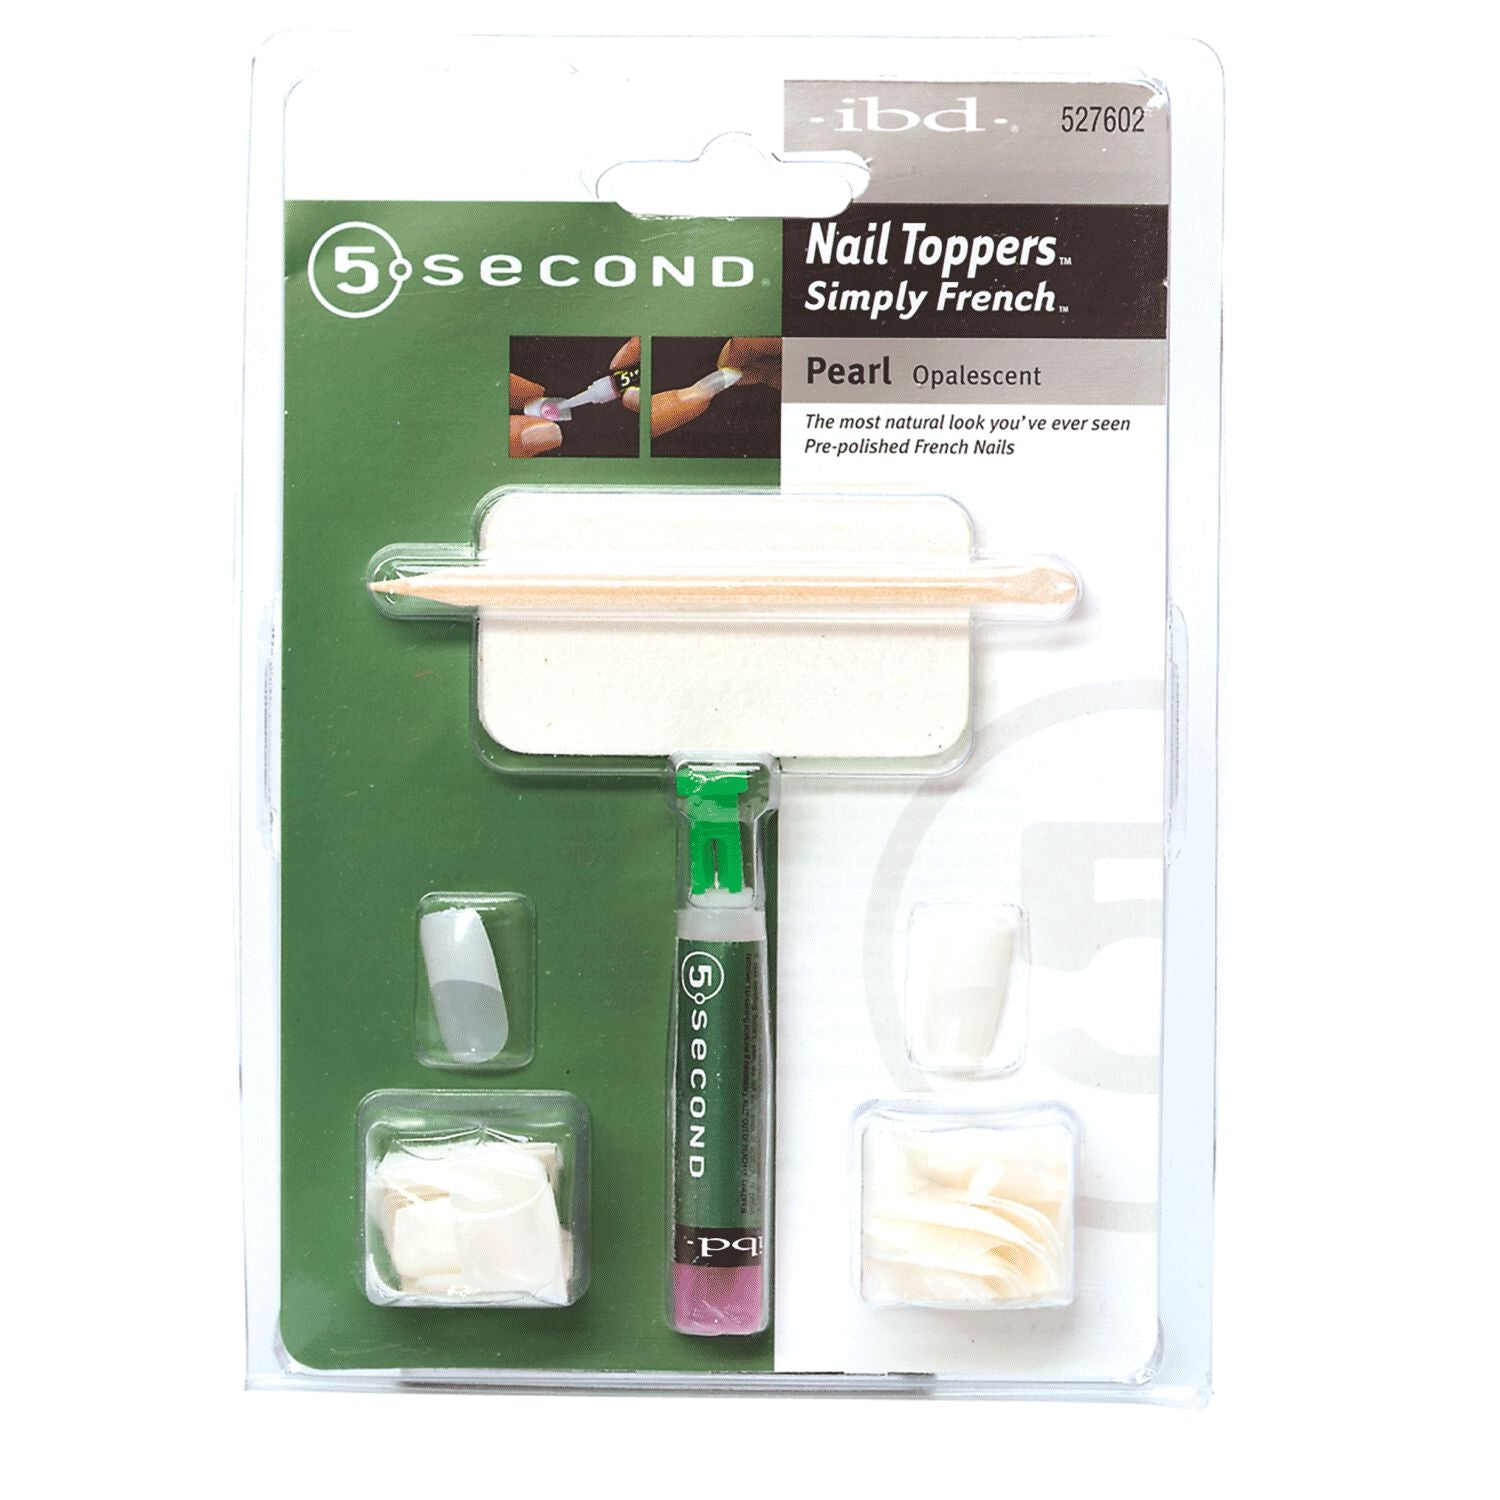 IBD 5 Second Nail Toppers Simply French Tip Kit